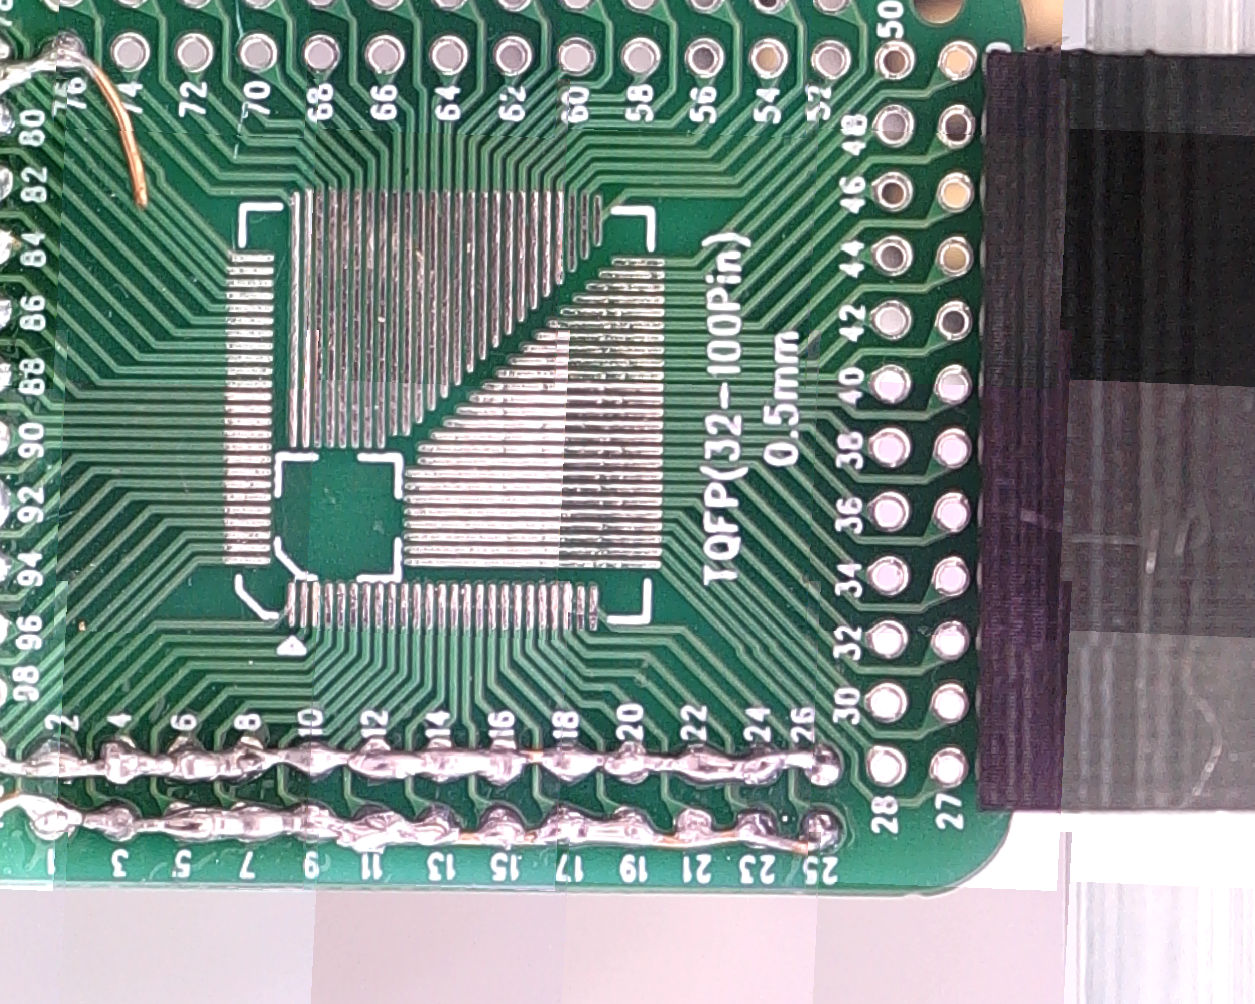 Stitched PCB image generated with the movable camera system